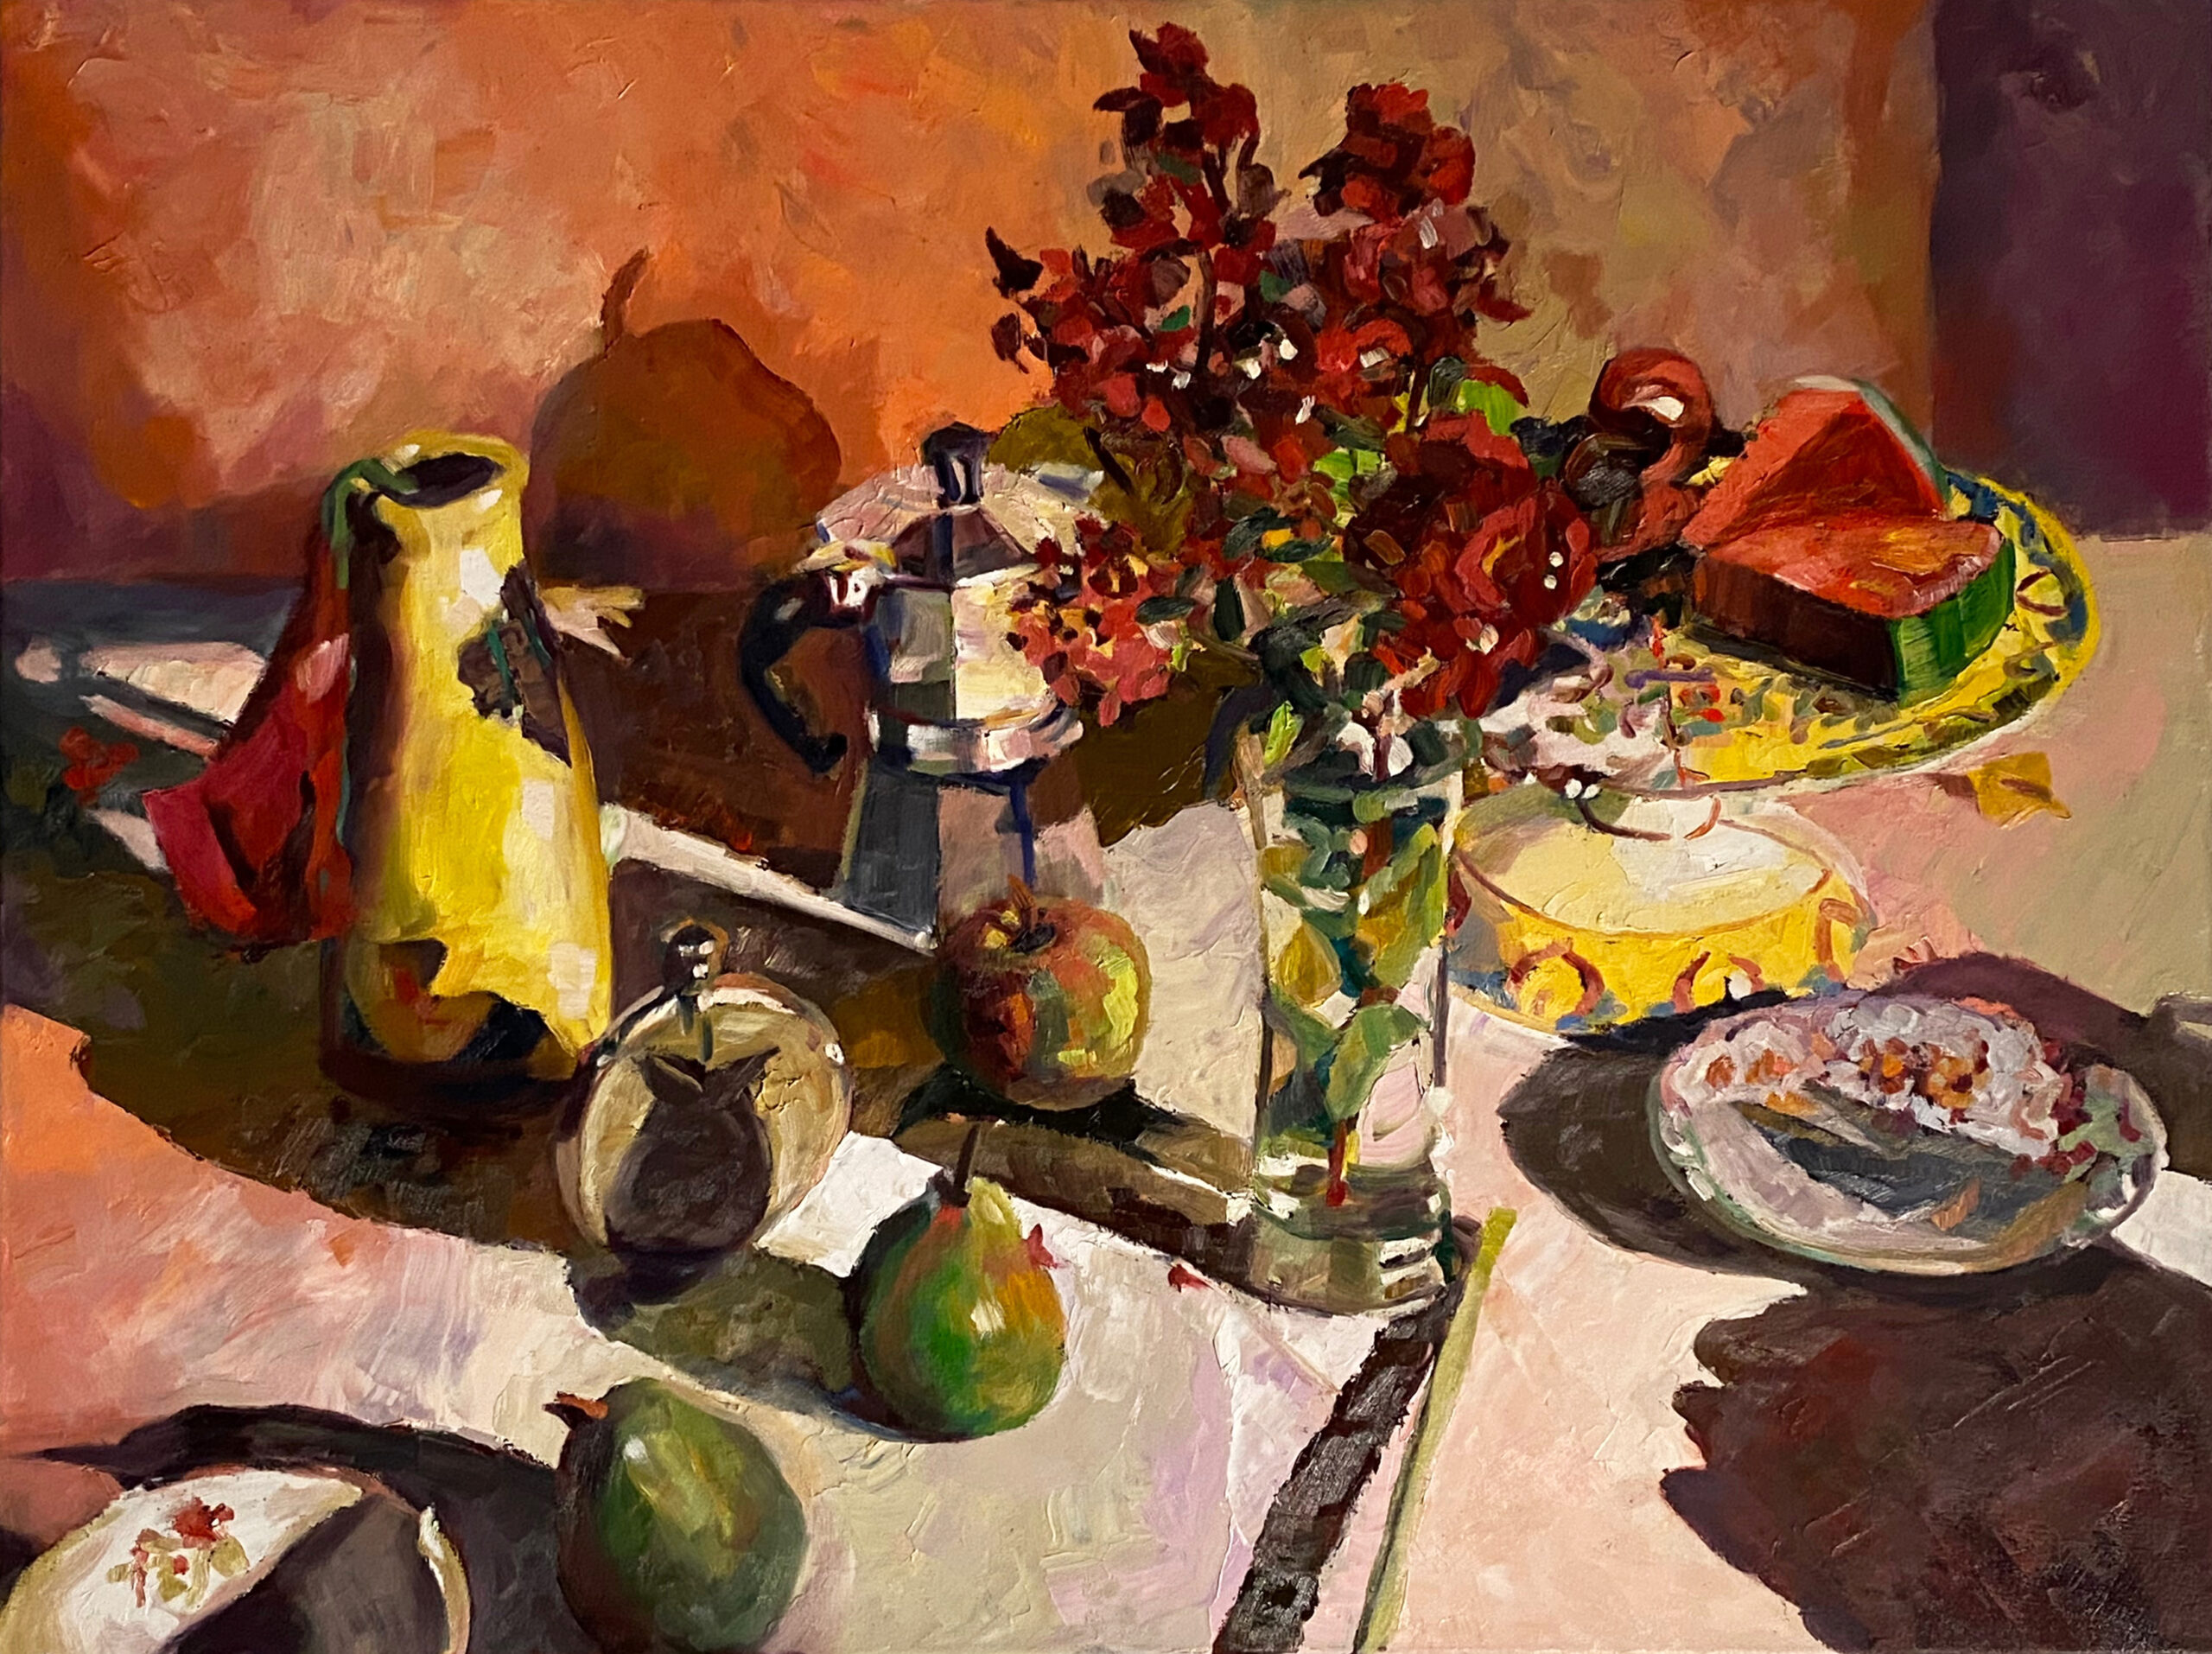 Rosemary Valadon 'Hip flask, coffee, fruit and flowers' oil on canvas 76 x 101cm $12,000